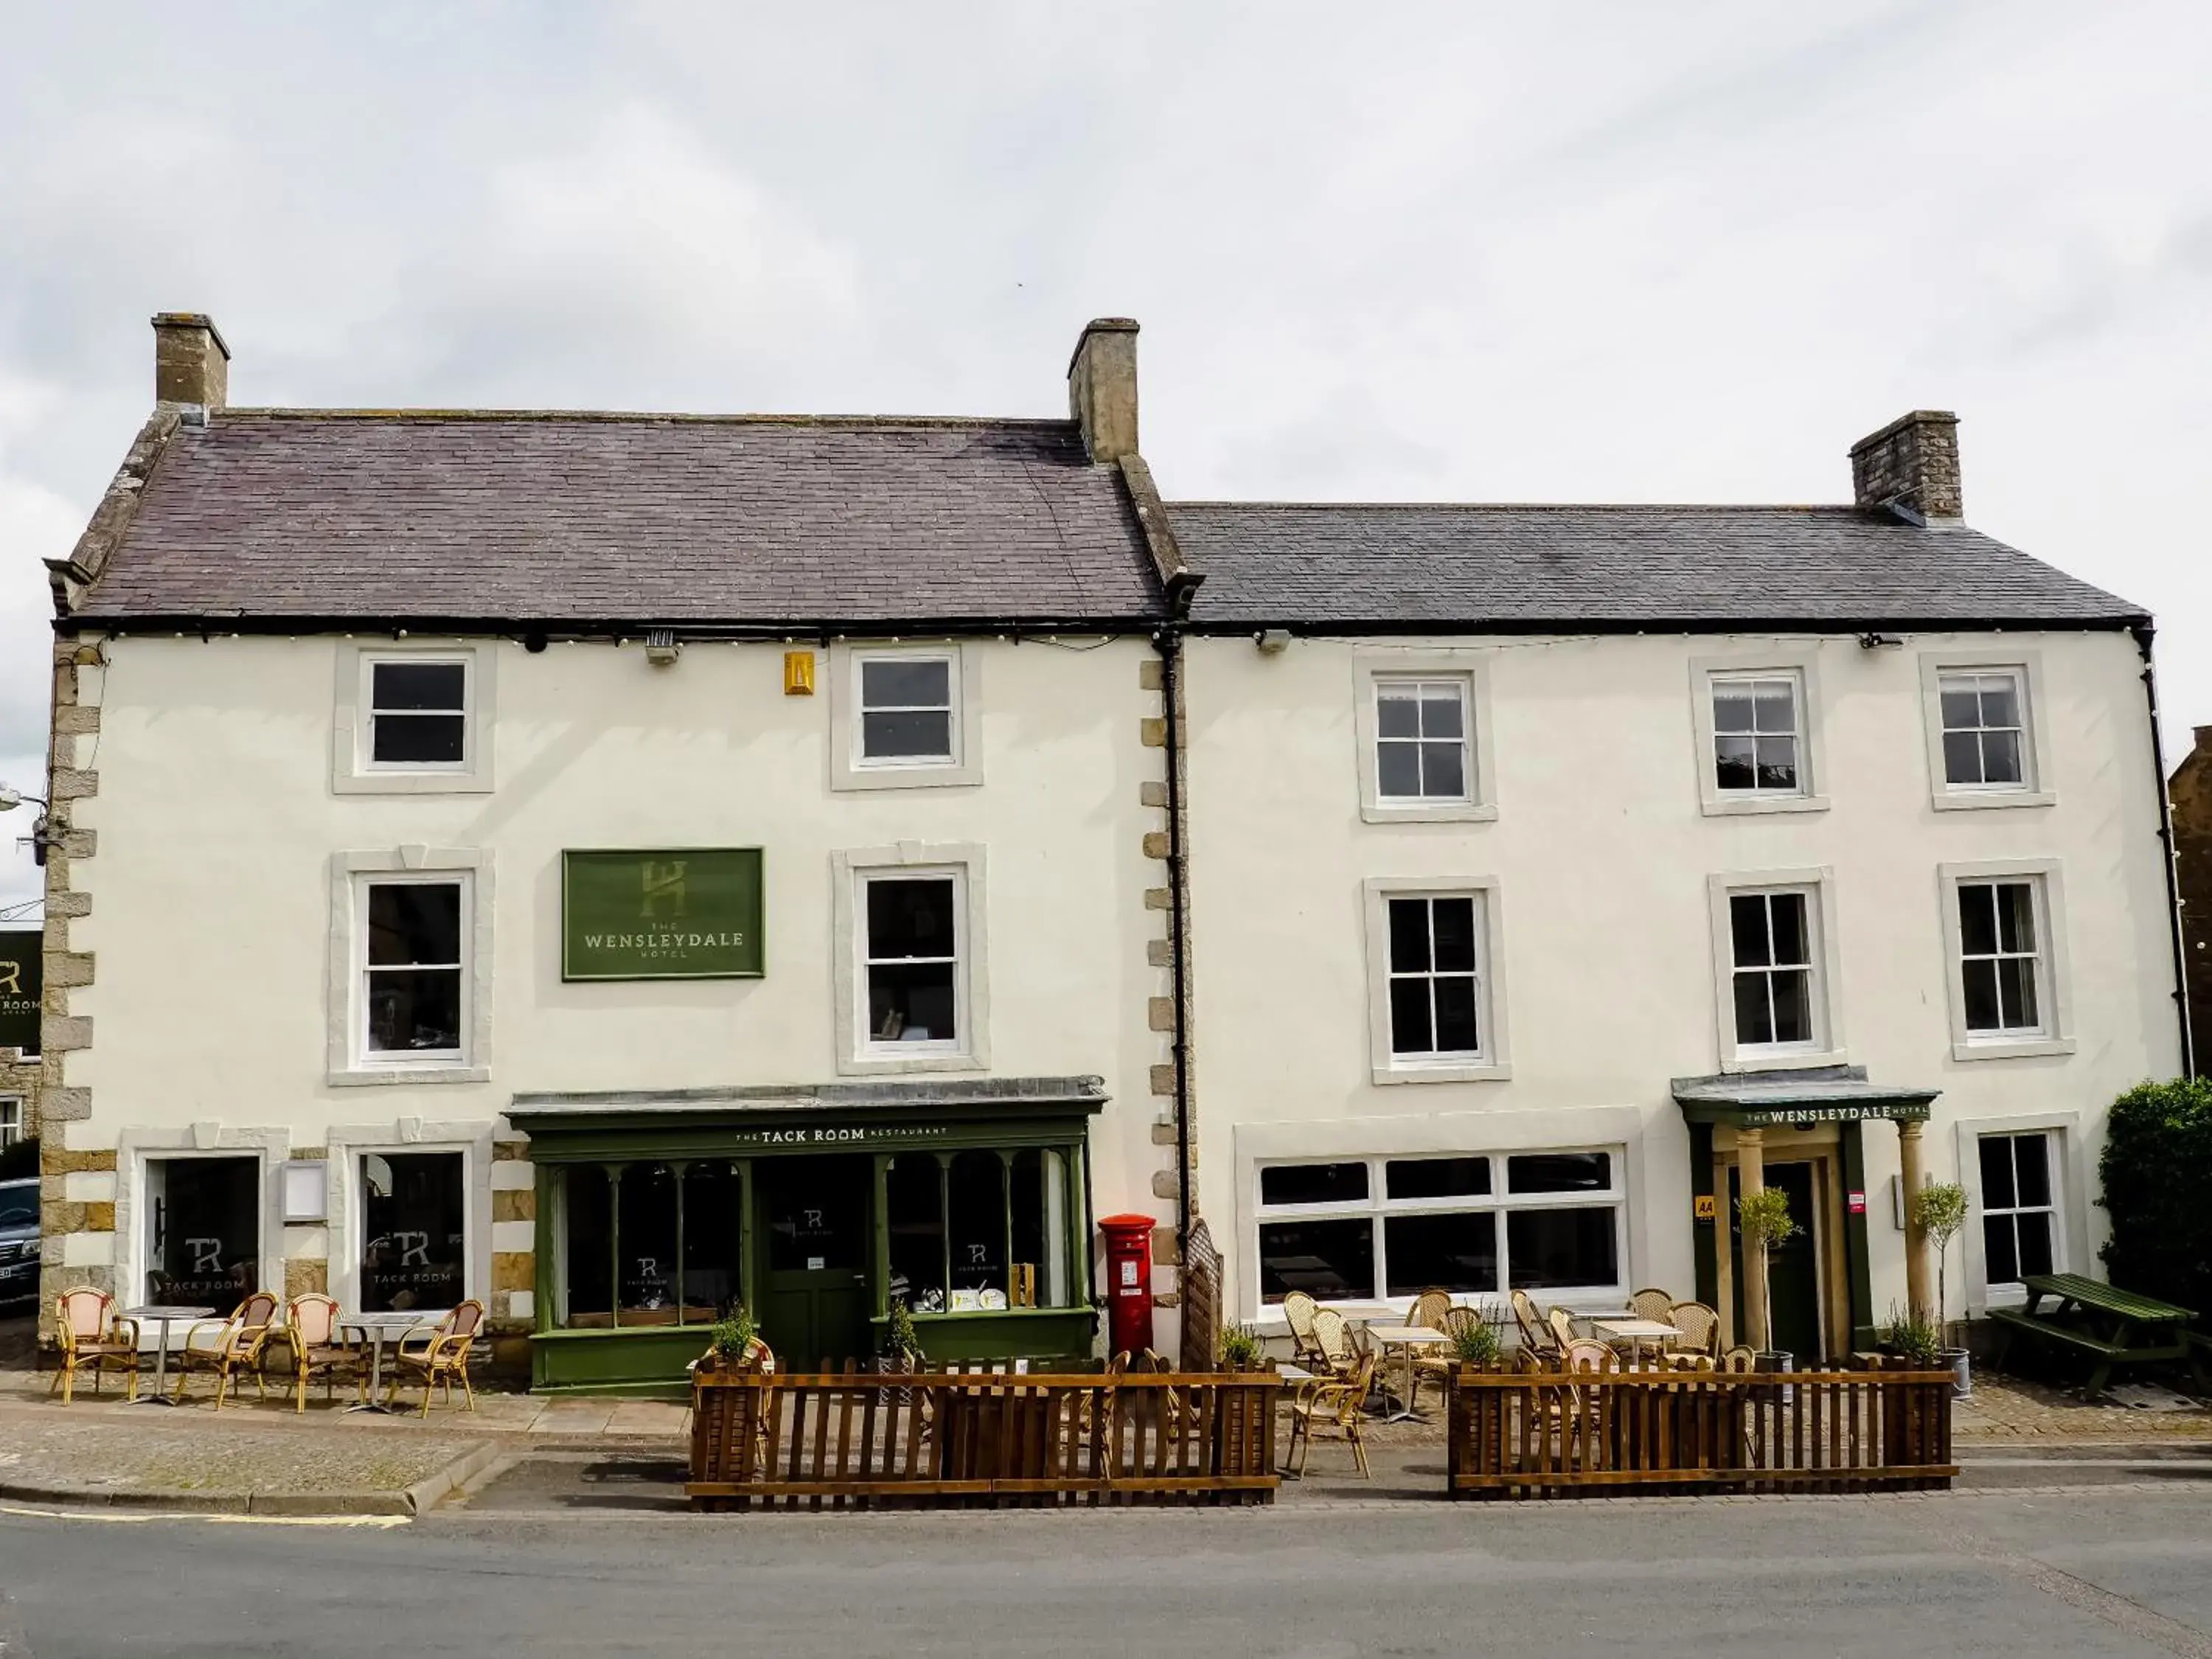 Property Building in The Wensleydale Hotel